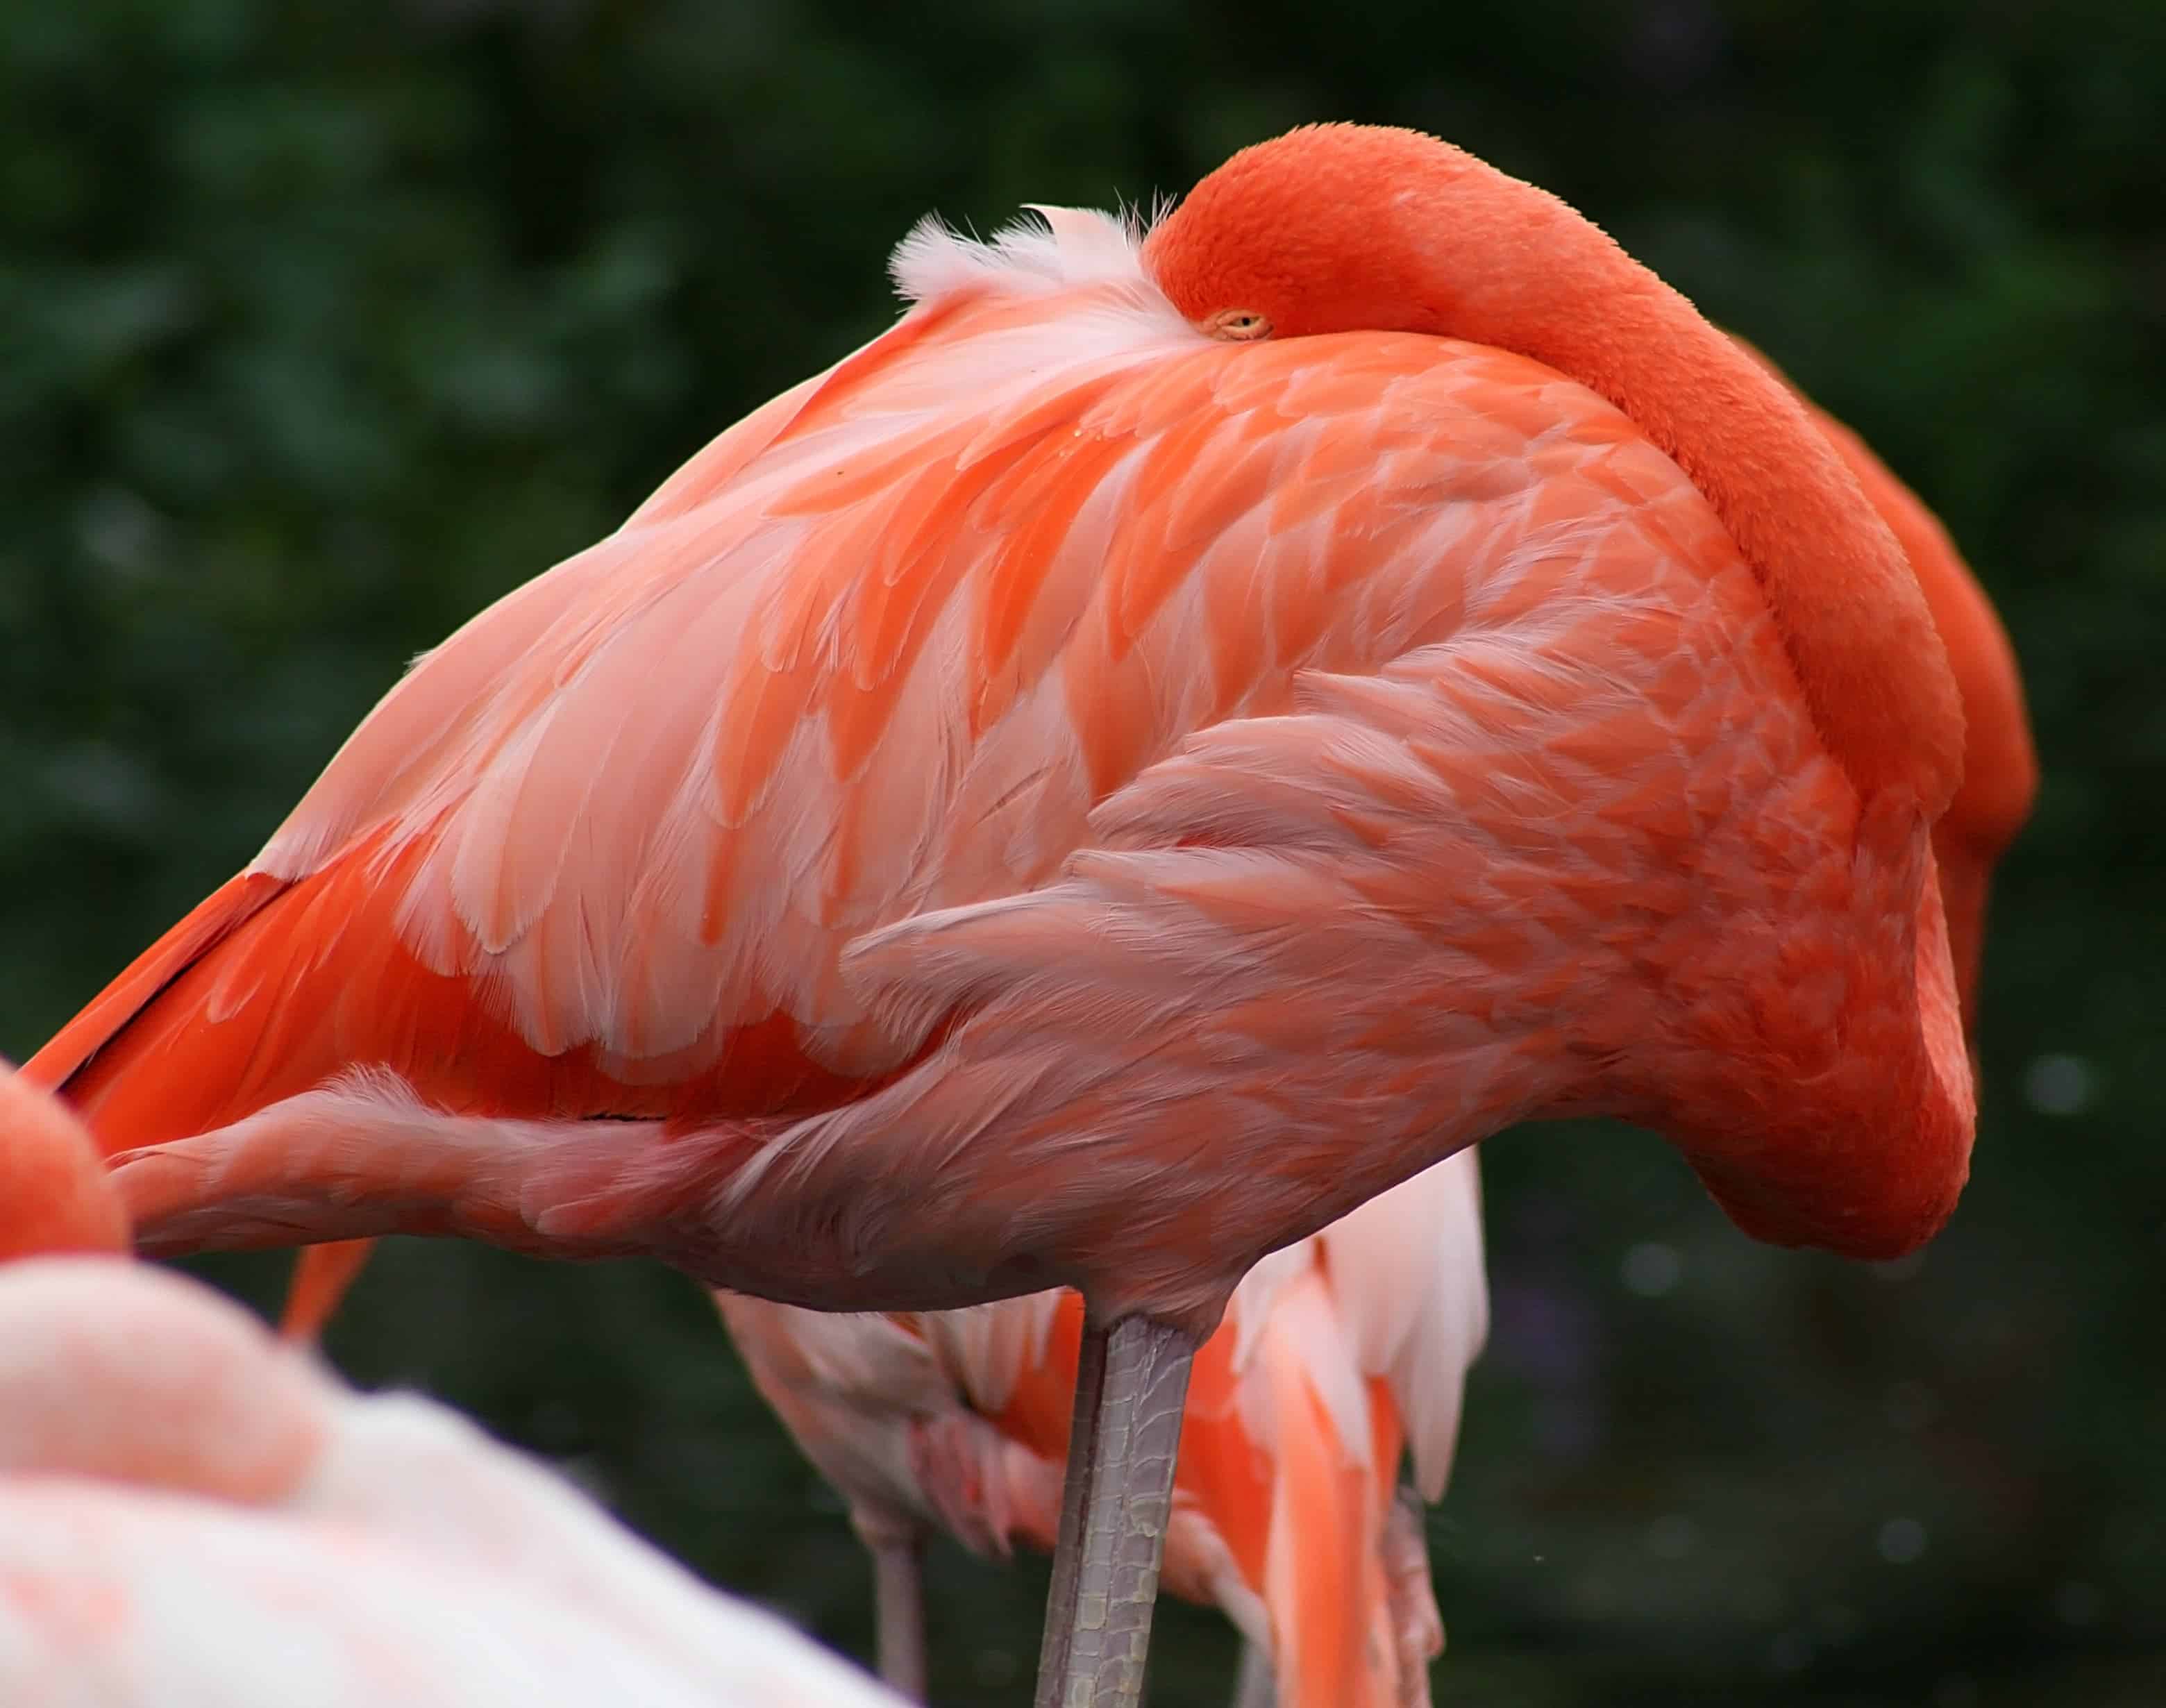 Flamingoes are so comfortable on one leg they can even sleep like that. Image credits: Darren Swim.